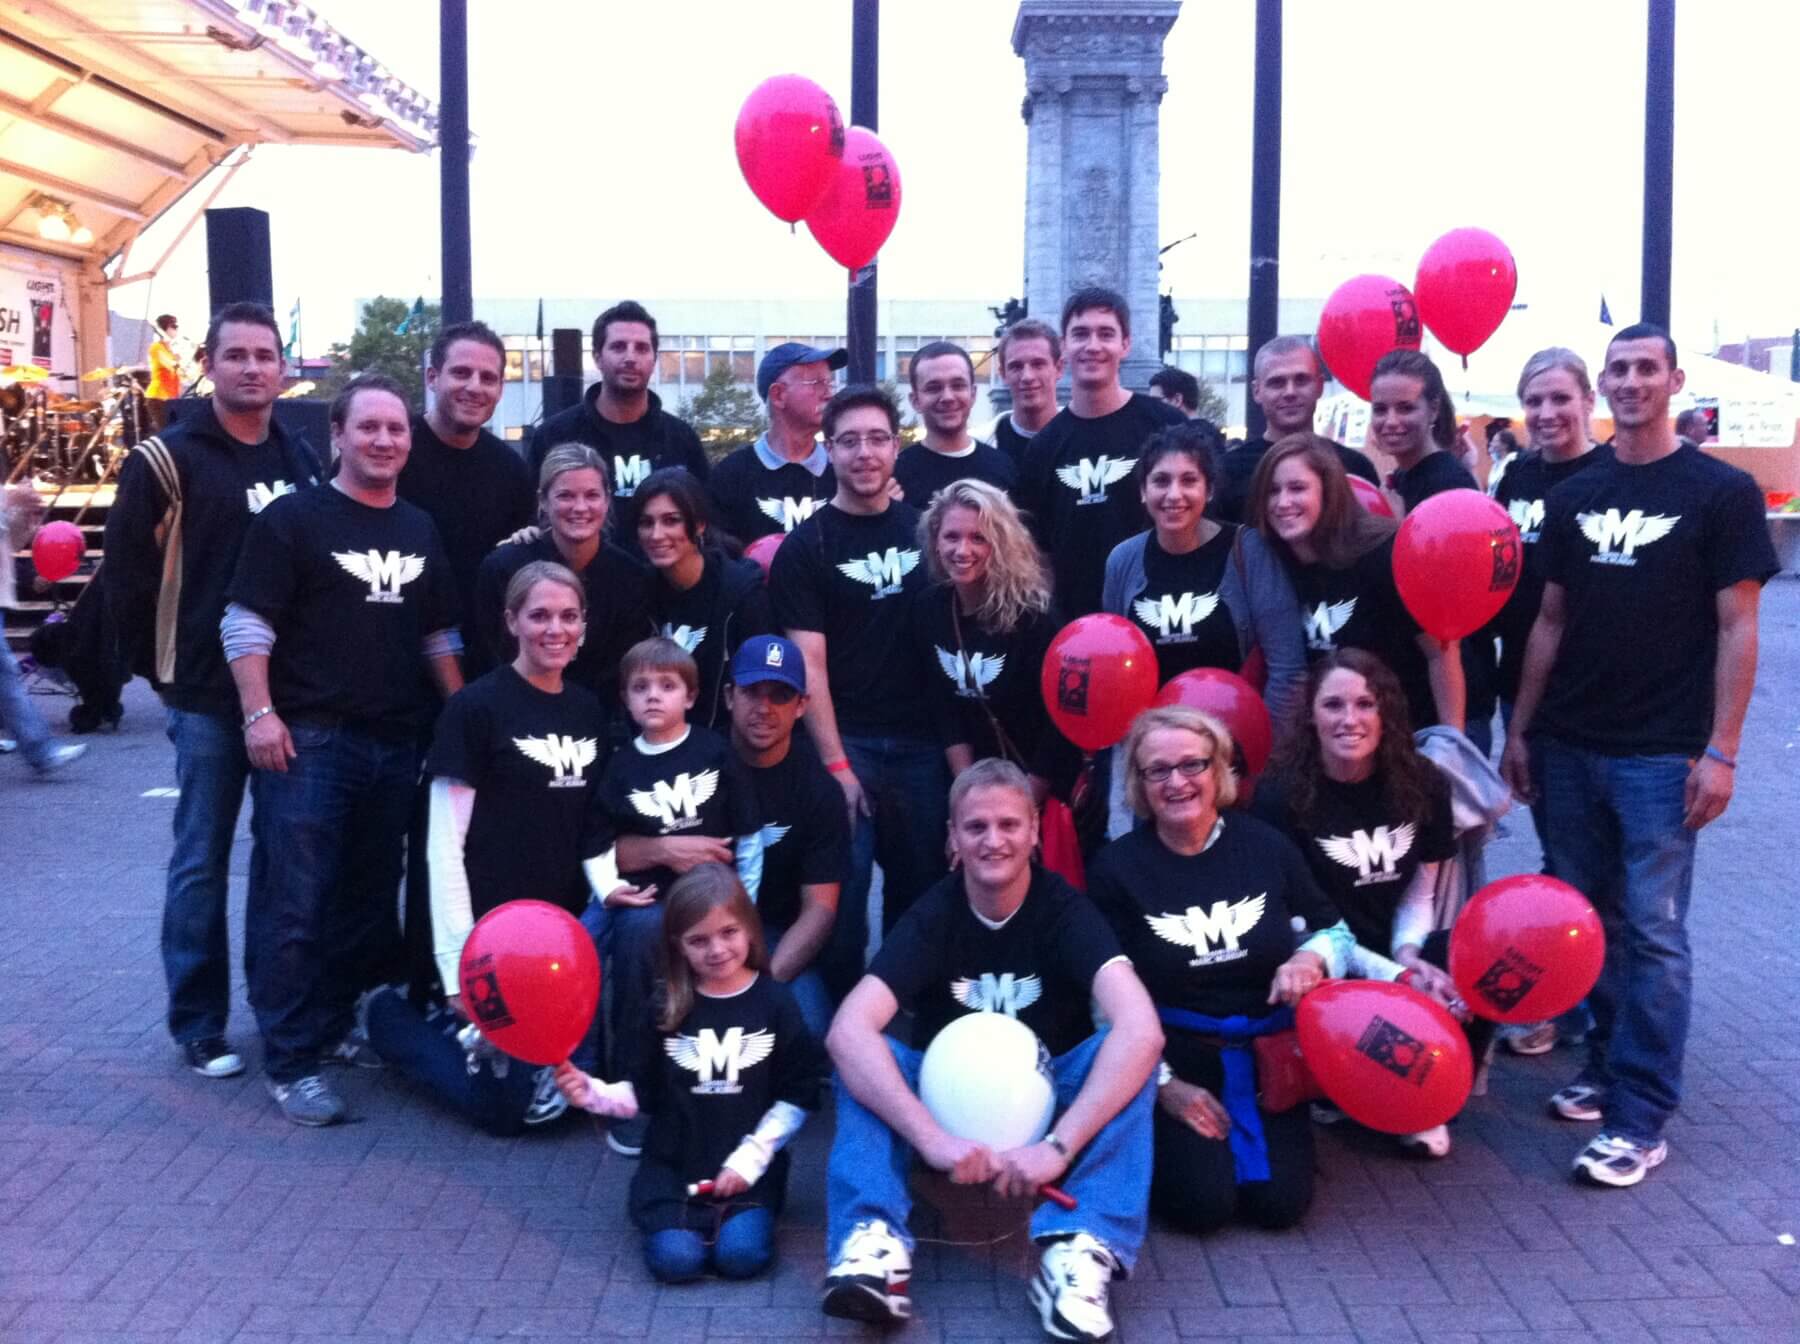 Terakeet employees pose for a photo at the Light the Night Walk.